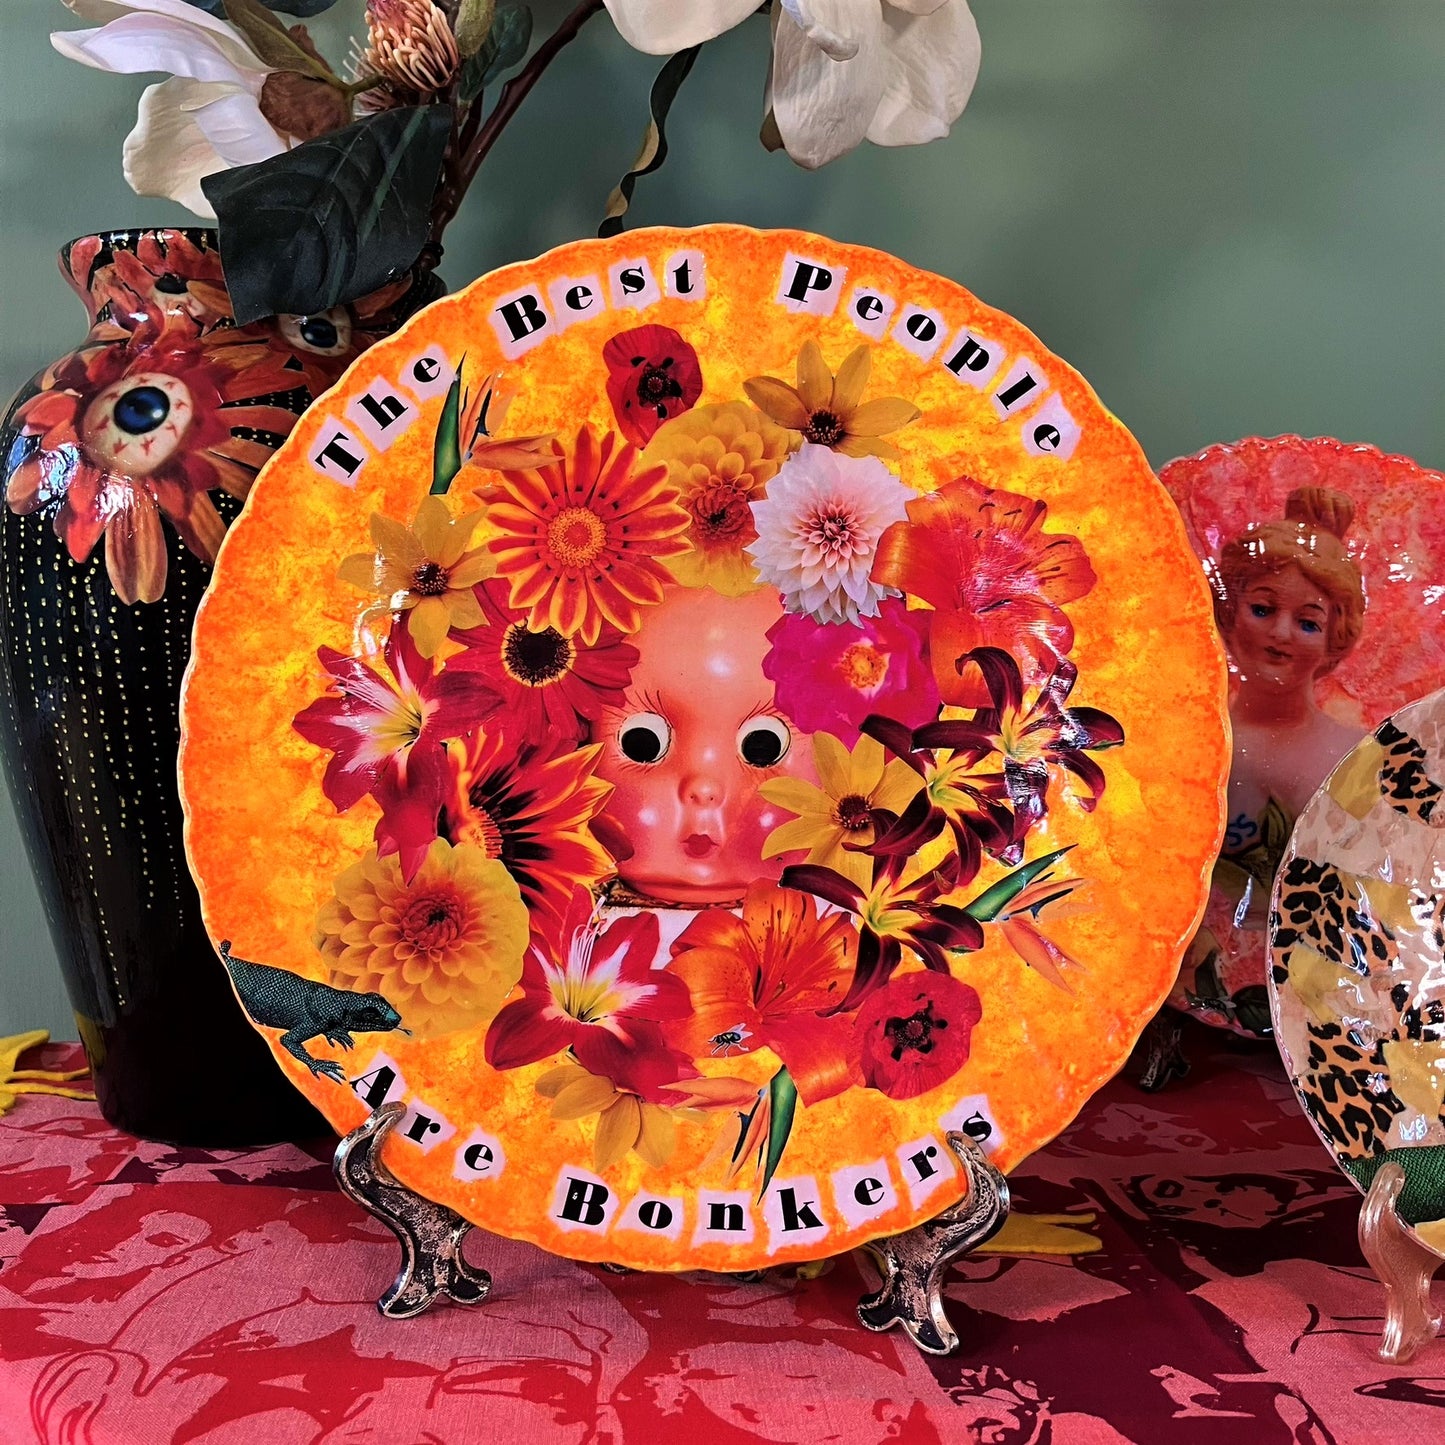 Orange Upcycled Wall Plate - "The Best People Are Bonkers" - by House of Frisson